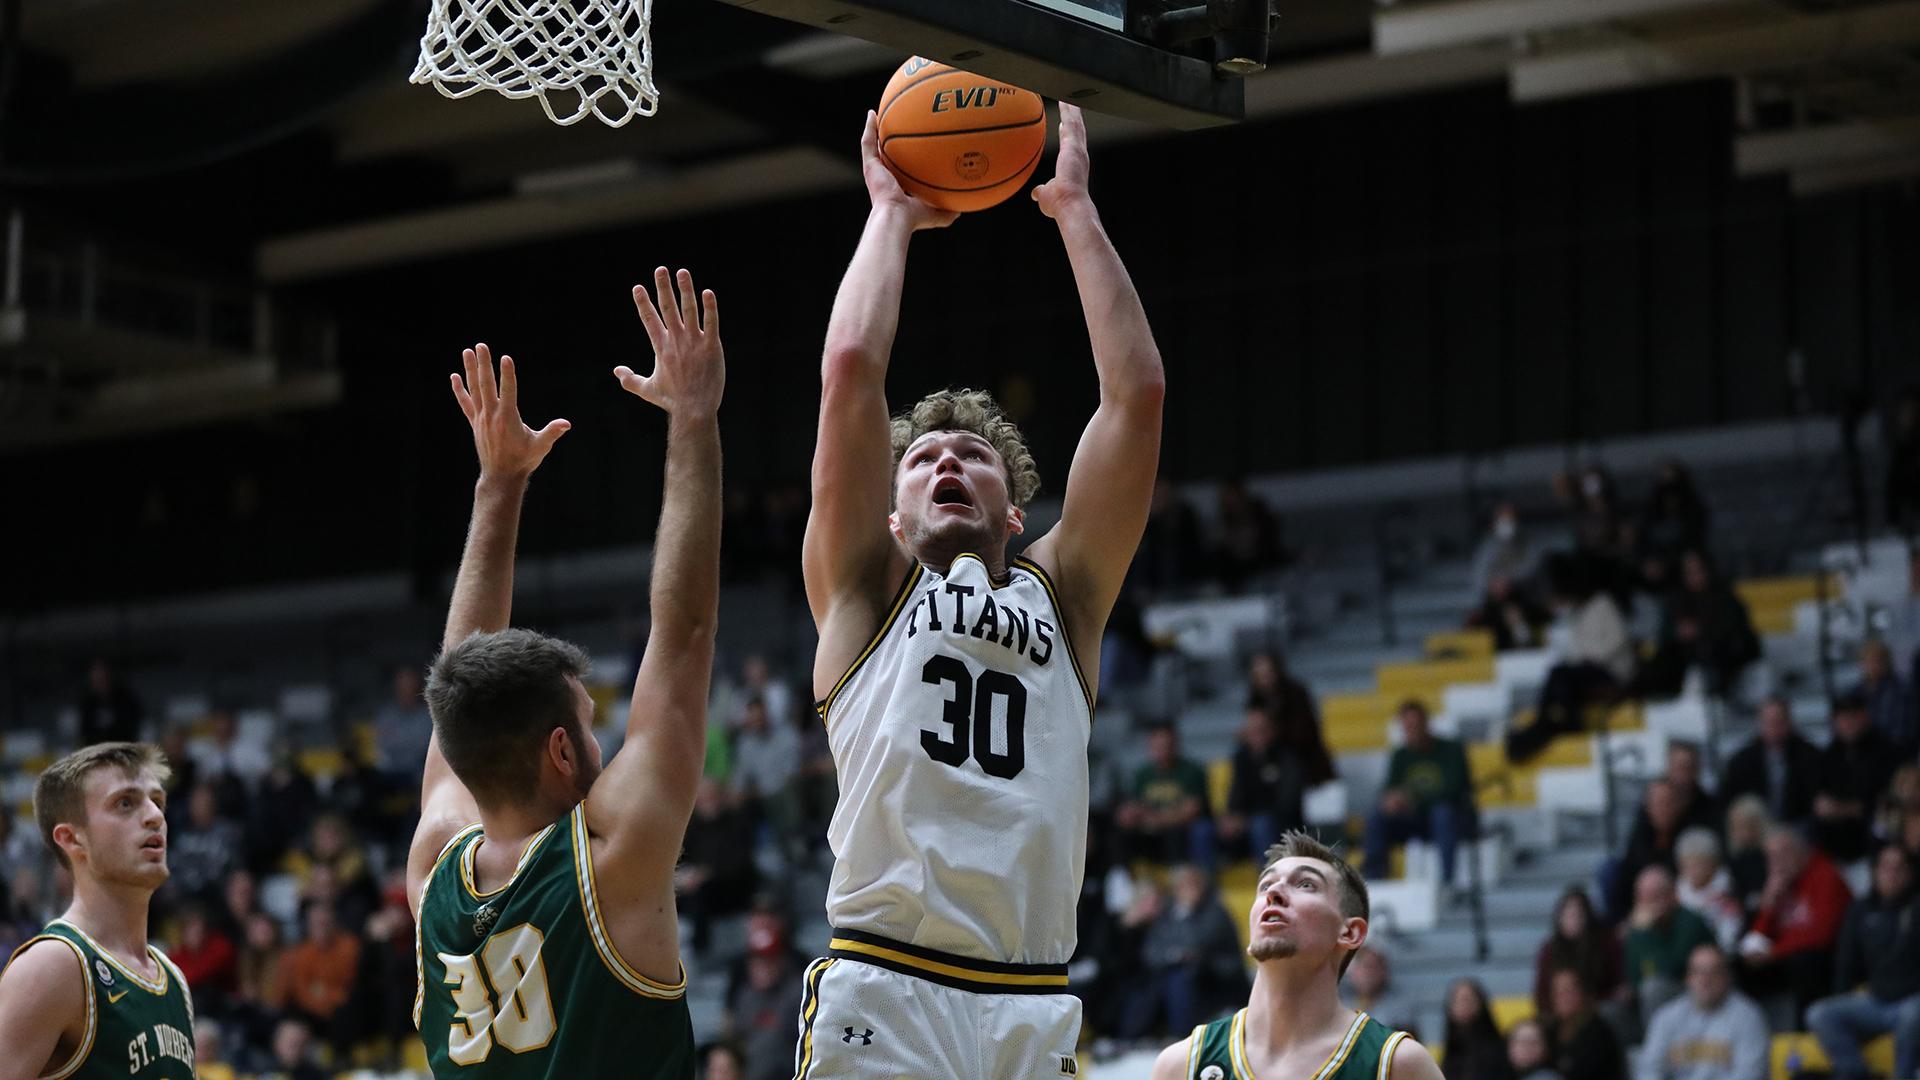 Levi Borchert tallied his sixth double-double of the season with 18 points and 18 rebounds against the Green Knights.